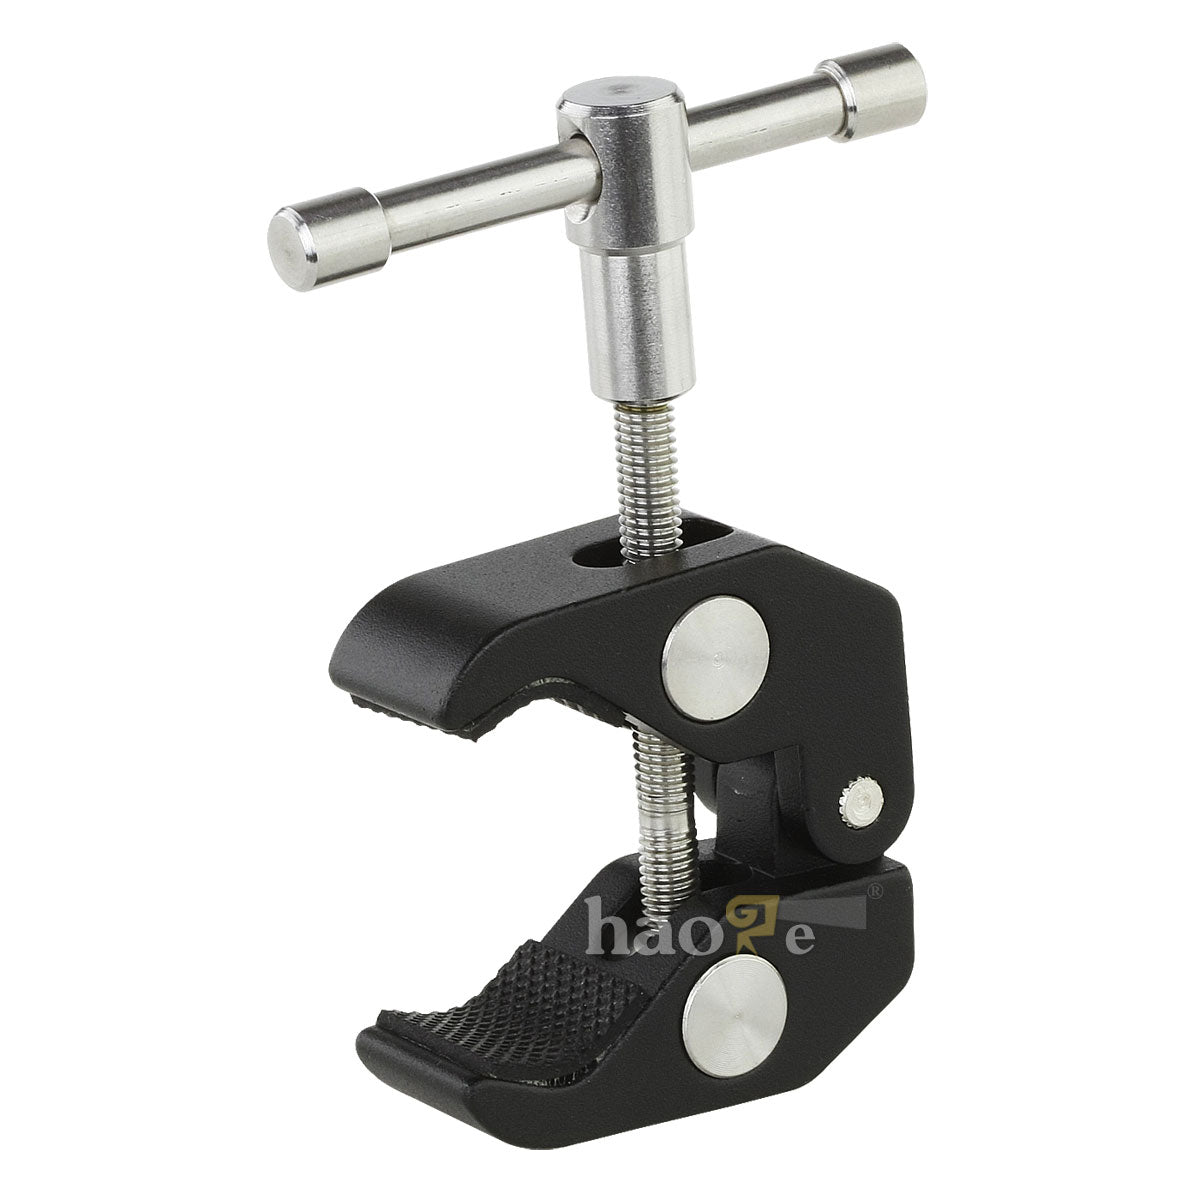 Haoge Large Super Clamp with 1/4" 3/8" Screw Thread for LCD Monitor DSLR Camera DV Tripod